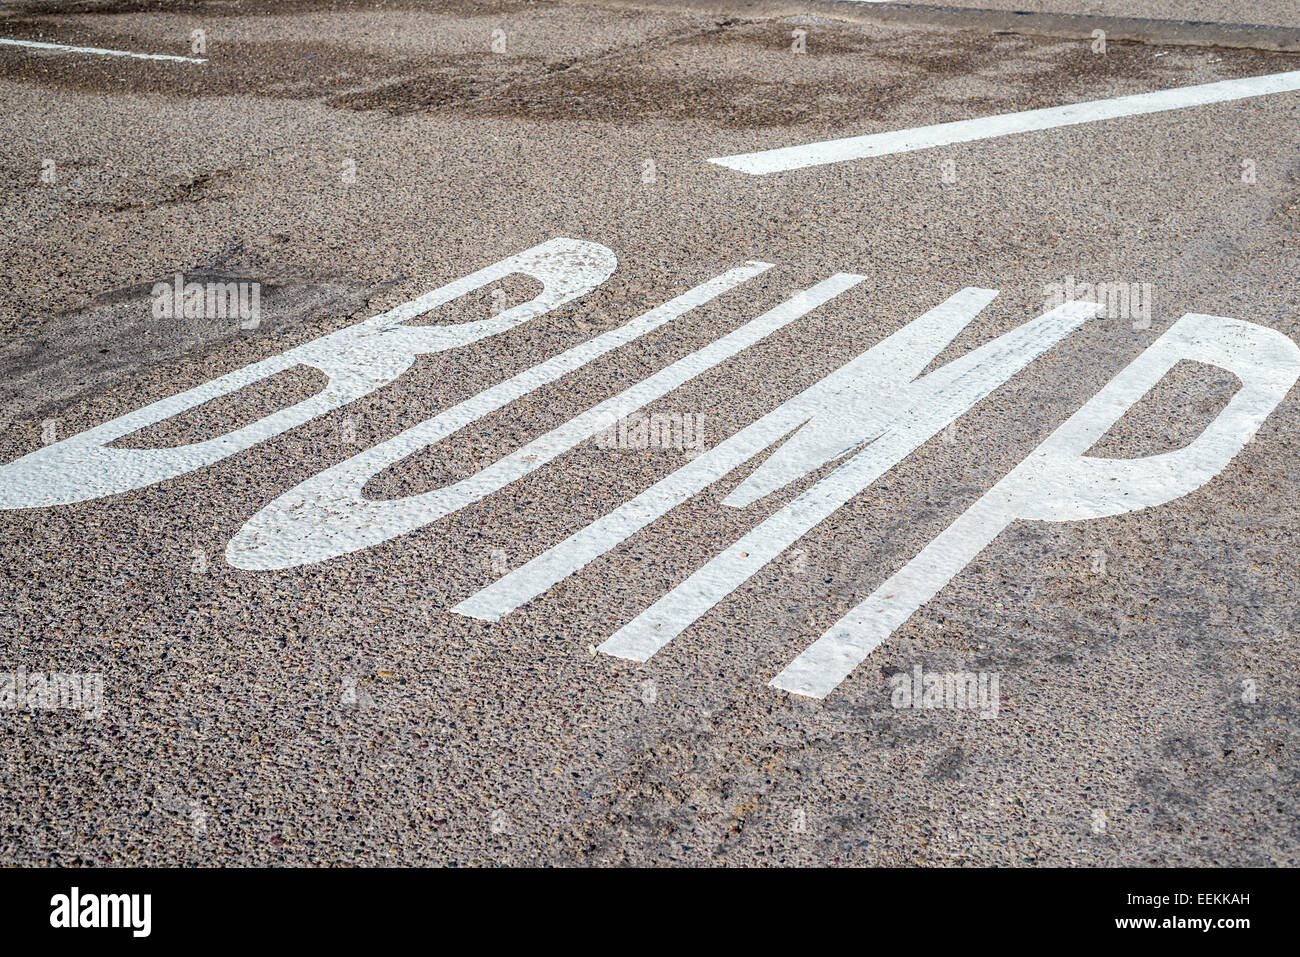 The word BUMP painted on an asphalt road. Stock Photo